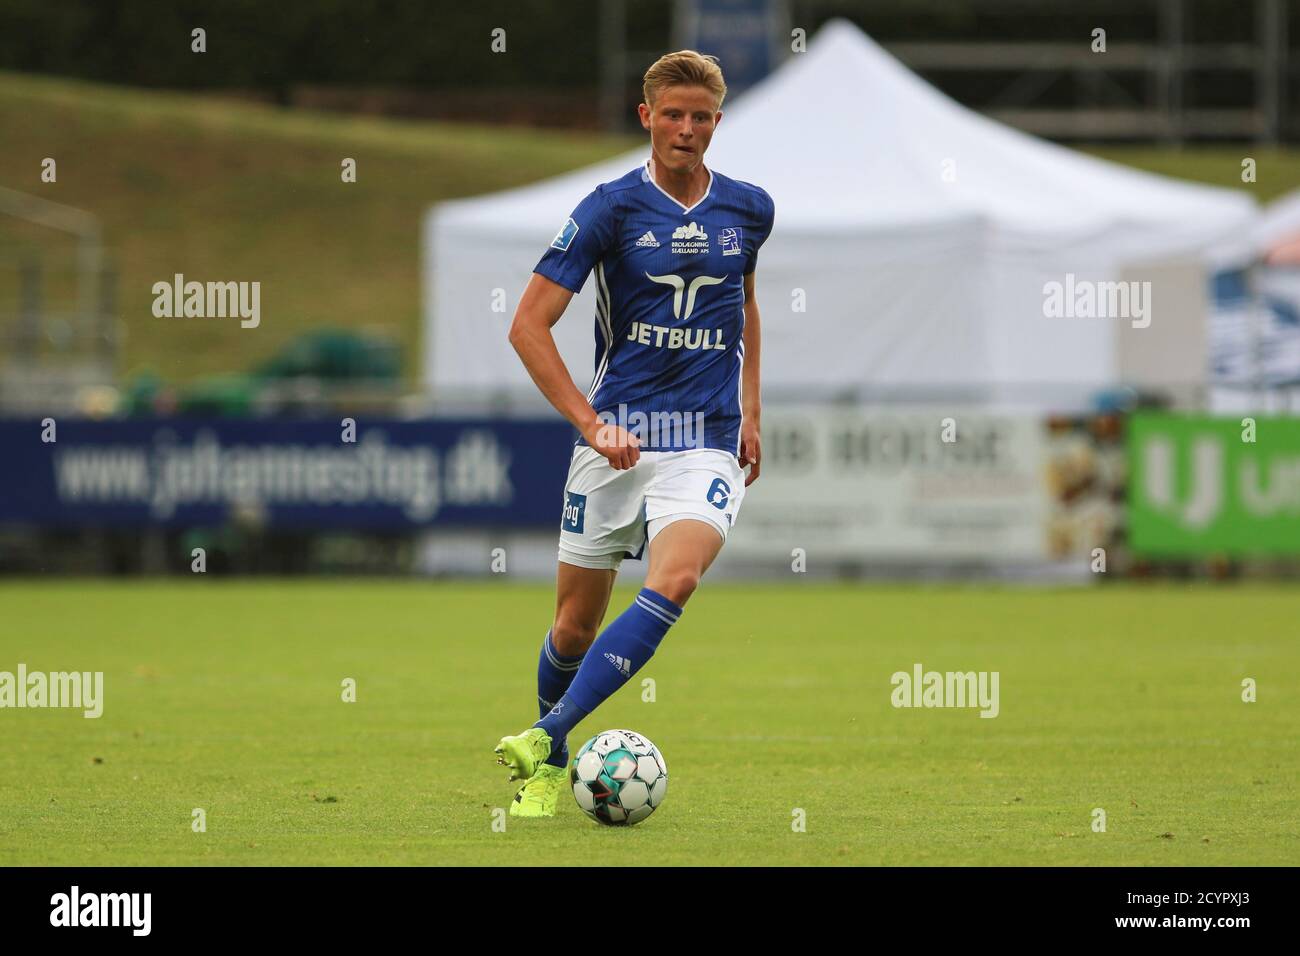 Lyngby, Denmark. 18th, June 2020. Frederik Winther (6) of Lyngby seen during the 3F Superliga match between Lyngby Boldklub and Silkeborg IF at Lyngby Stadium. (Photo credit: Gonzales Photo - Rune Mathiesen). Stock Photo